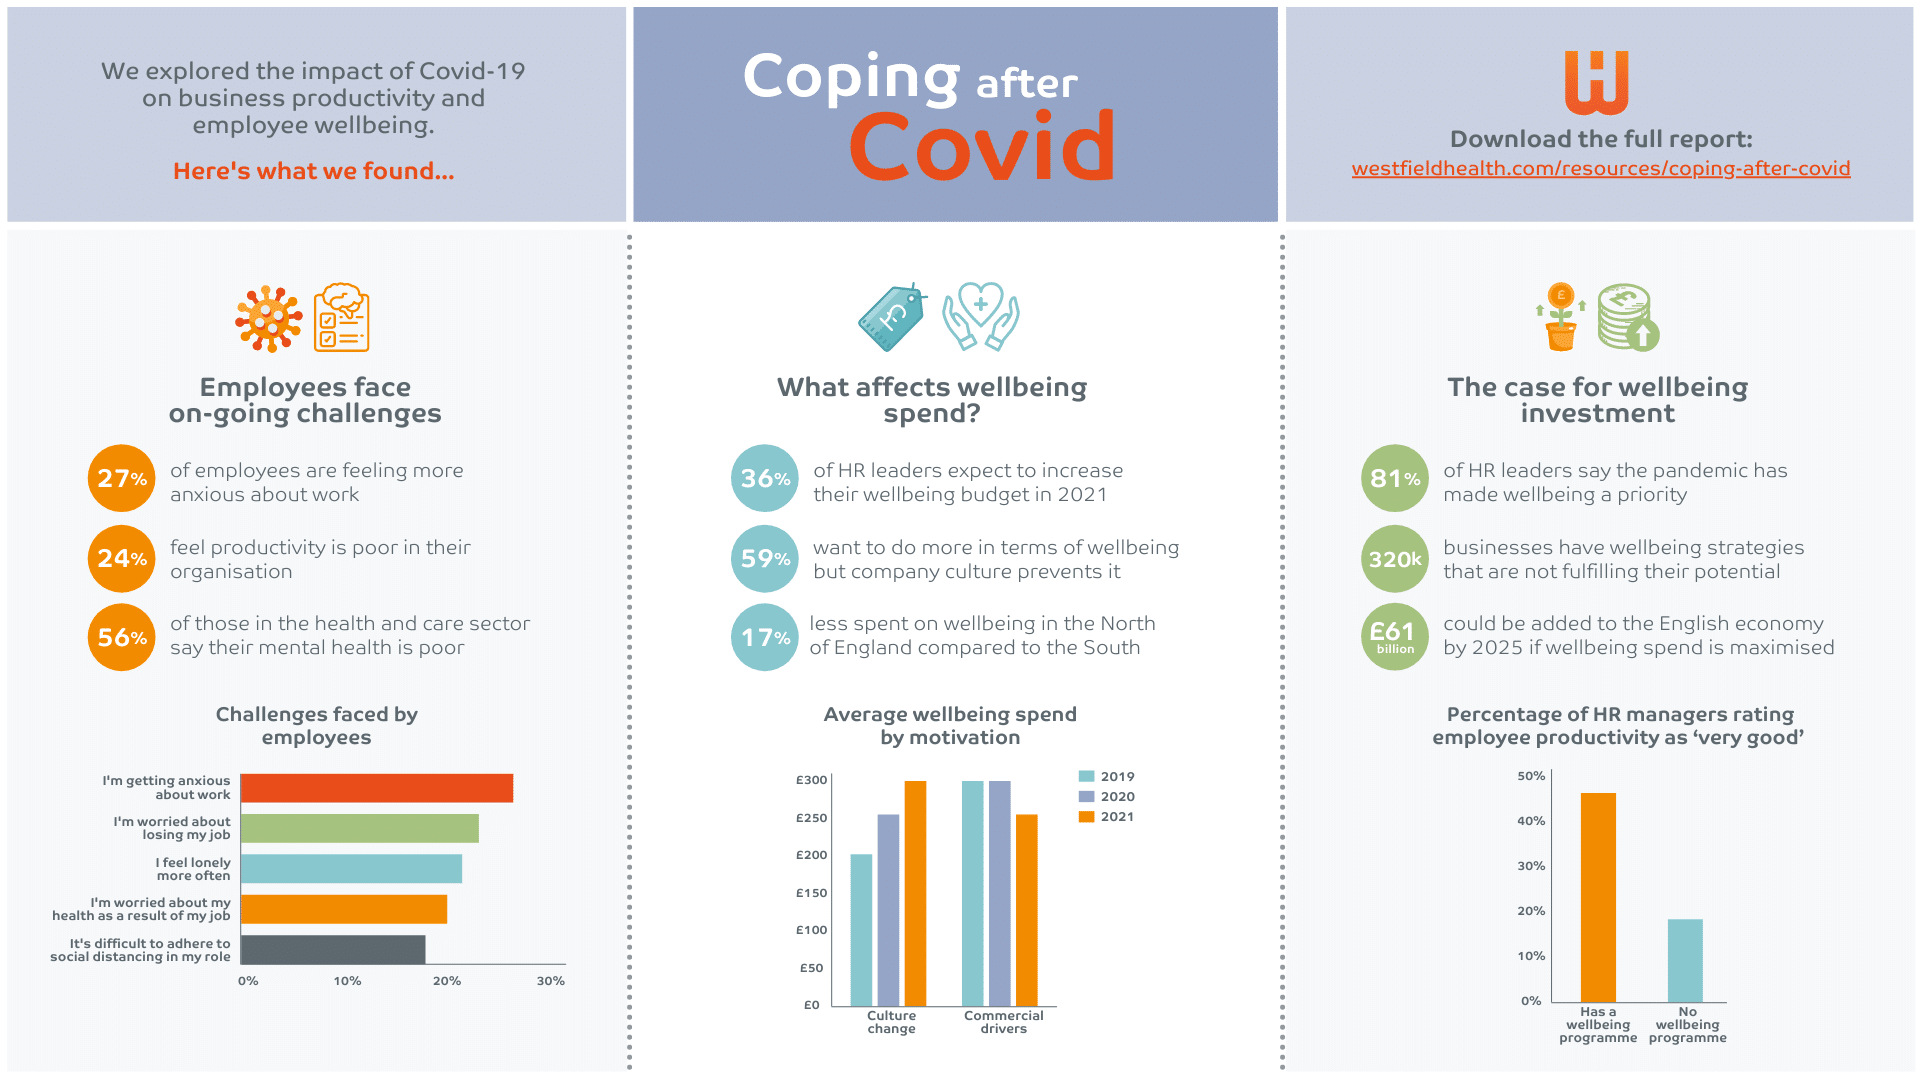 Coping after Covid - Key findings infographic